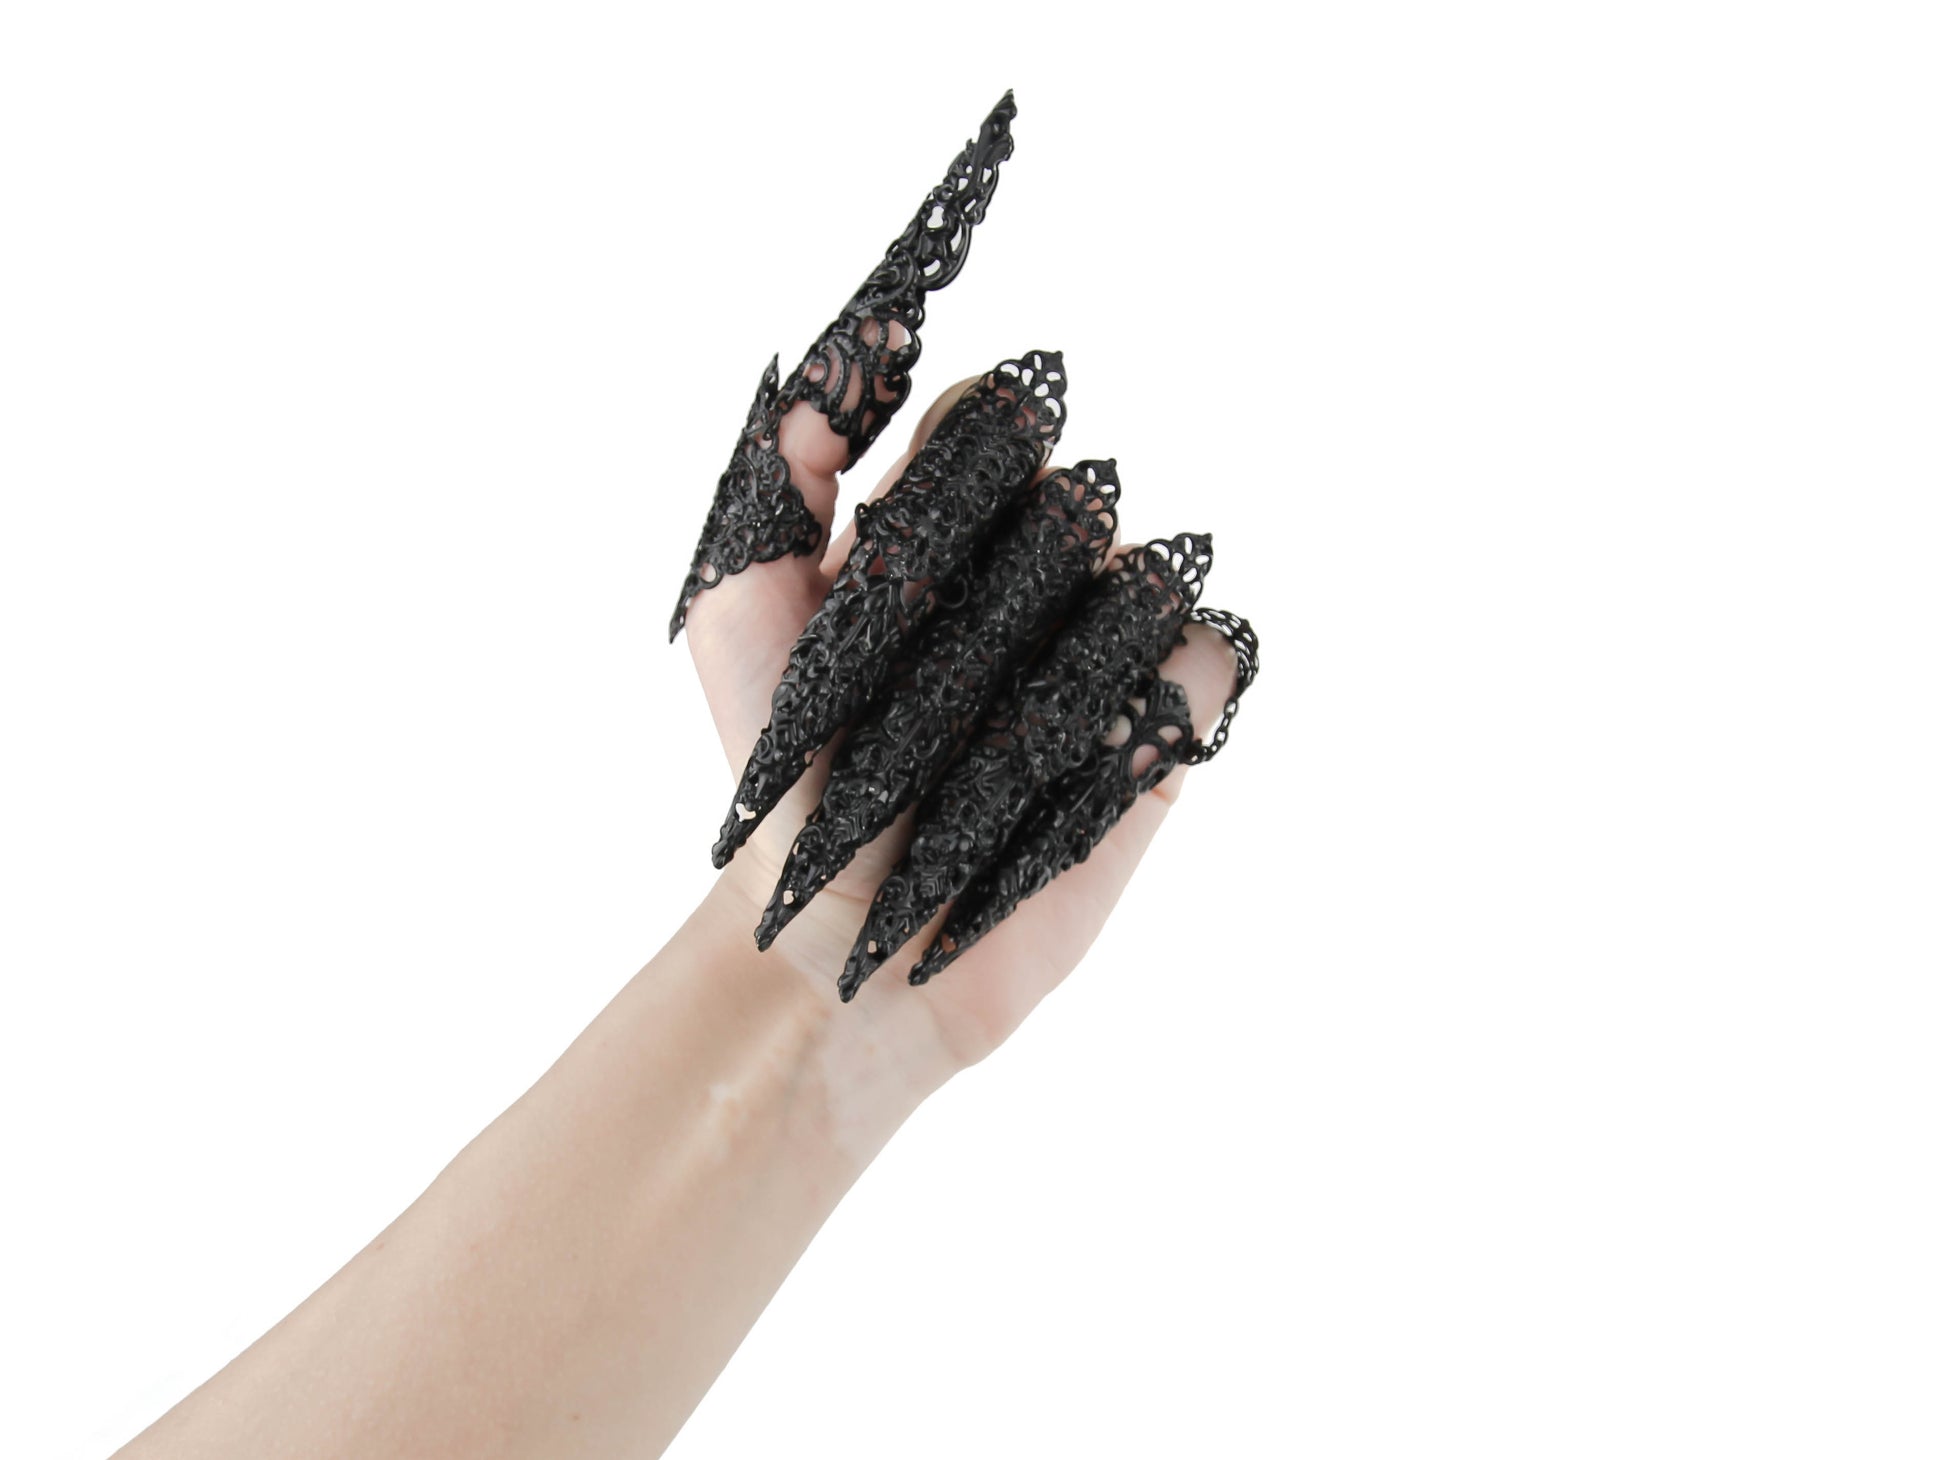 A hand elegantly displays Myril Jewels' black midi rings with claws. The intricate design exudes a dark, neo-gothic charm, perfect for adding a touch of avant-garde to Halloween or everyday gothic-chic ensembles.